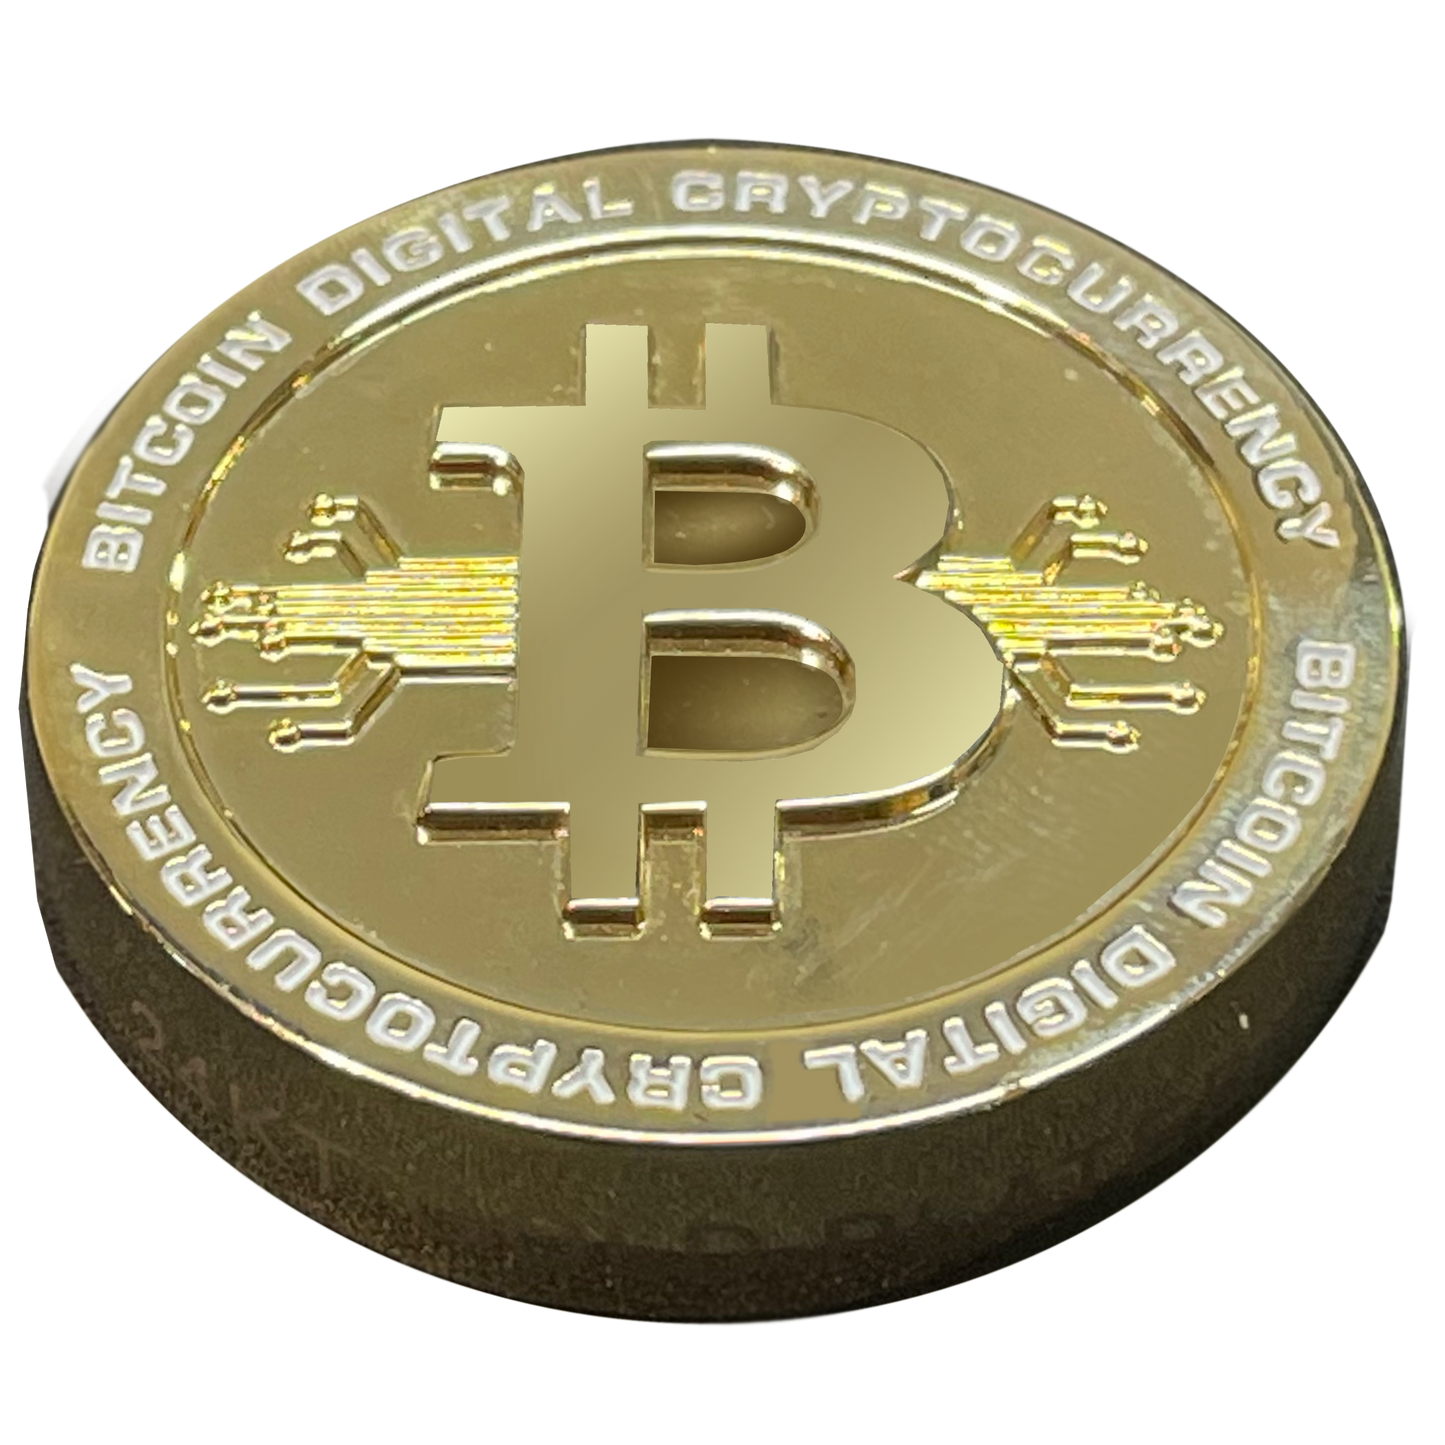 BL4-013 24KT Gold plated huge Bitcoin BTC Coin Crypto Coin Cryptocurrency BLOCKCHAIN Coin